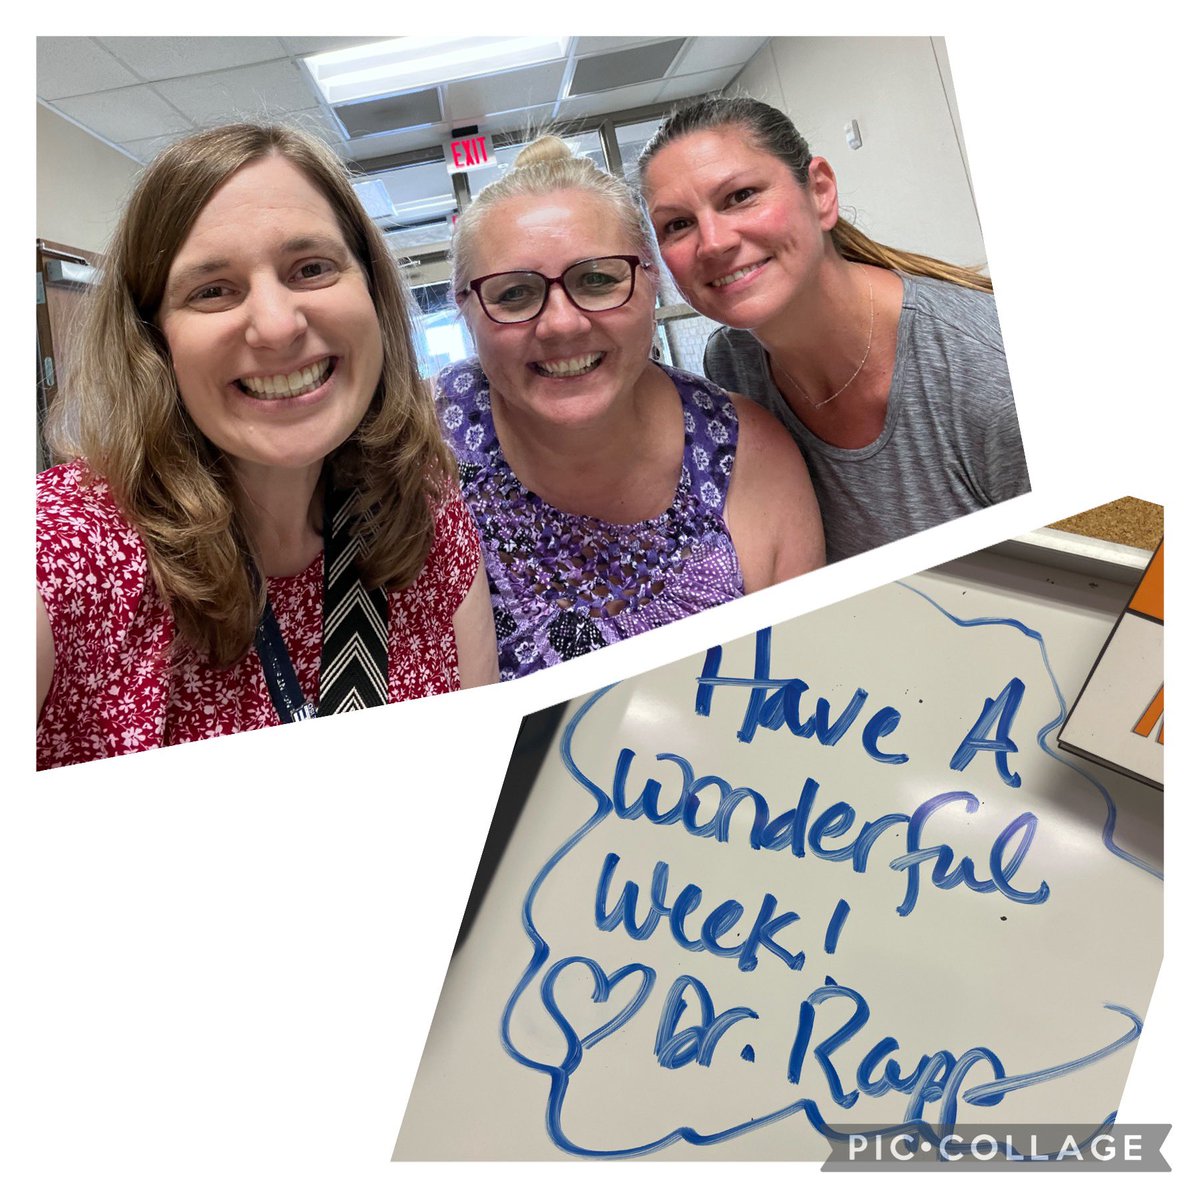 I was thrilled to bump into Dr. Rapp as she was secretly leaving encouraging notes for the teachers! No doubt that I work in the BEST school district! #BeTheOneInLISD @BBOwenES